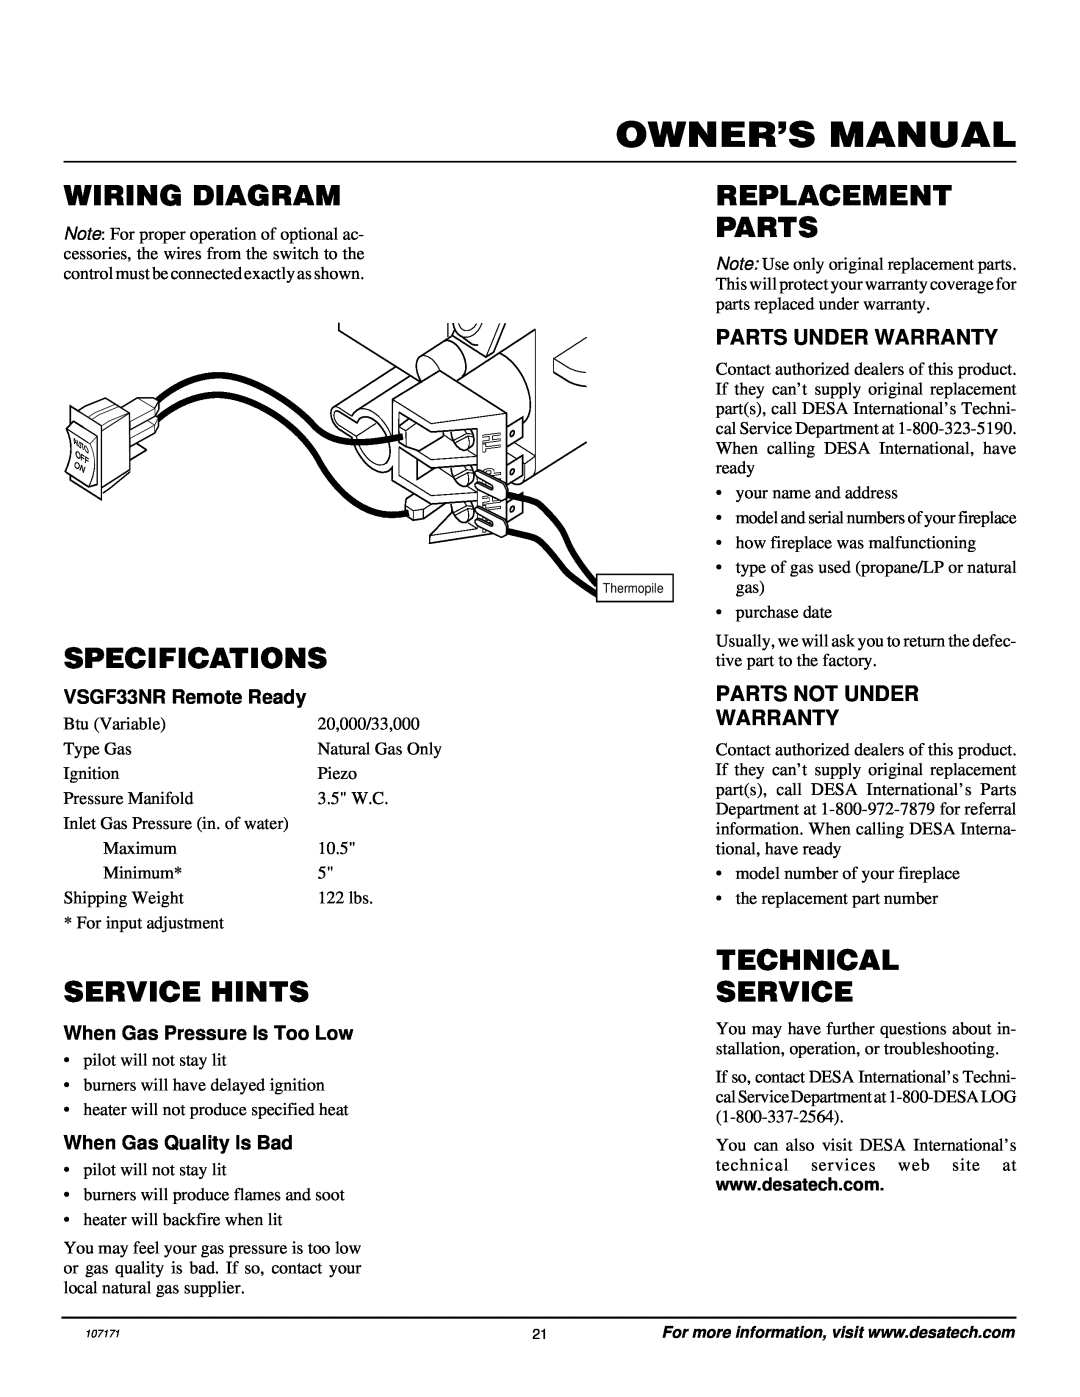 Desa VSGF33NR Wiring Diagram, Specifications, Service Hints, Replacement Parts, Technical Service, Parts Under Warranty 